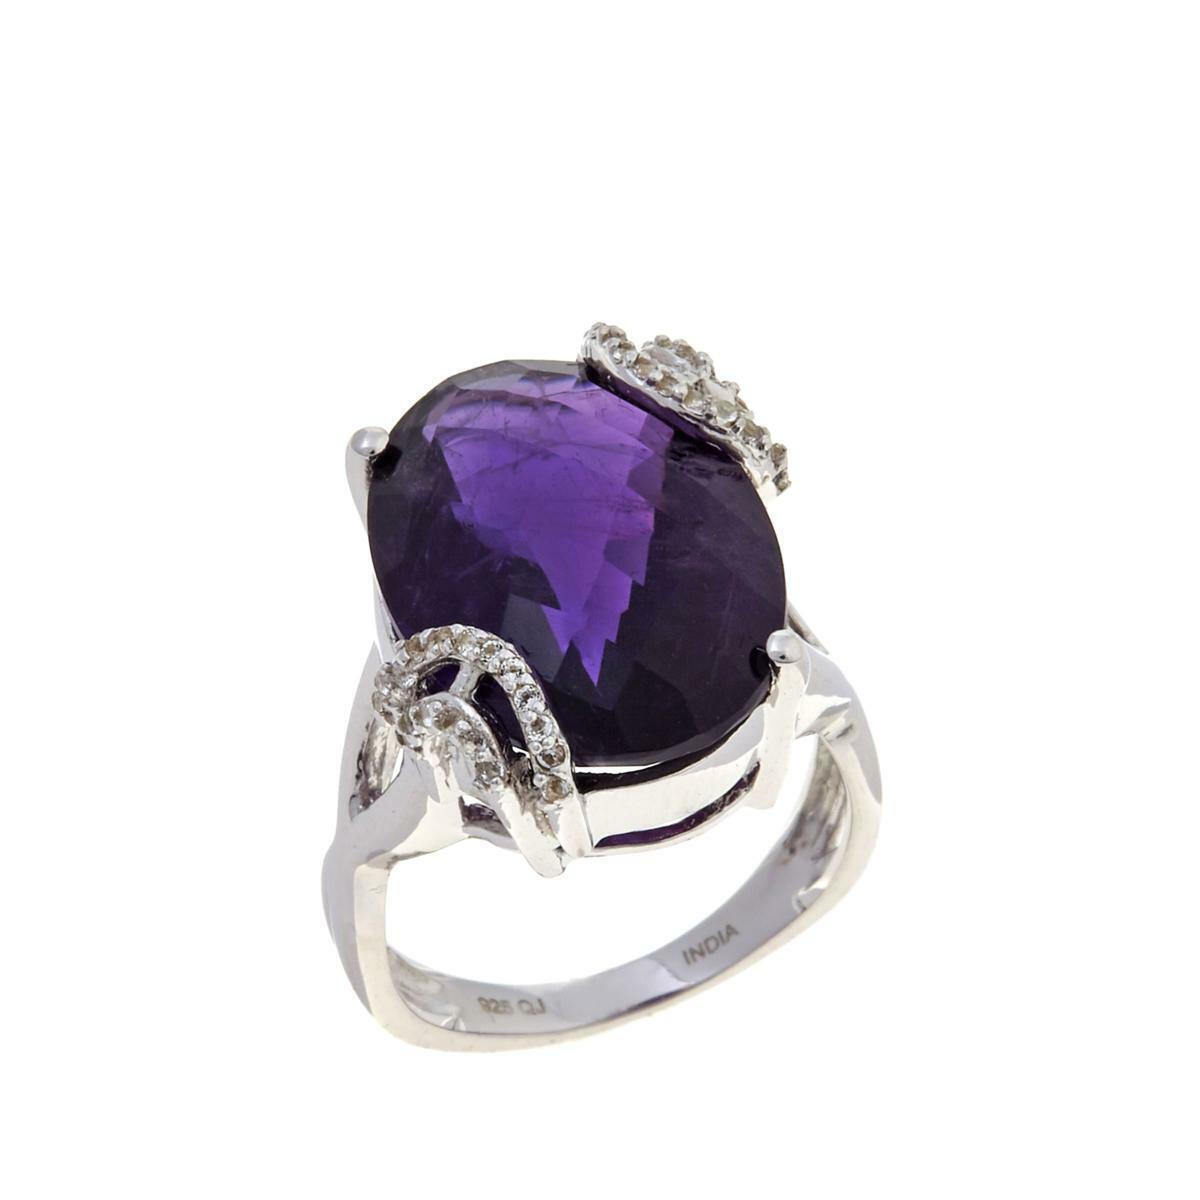 Colleen Lopez Amethyst Solitaire & White Topaz Sterling Silver Ring, Size 7